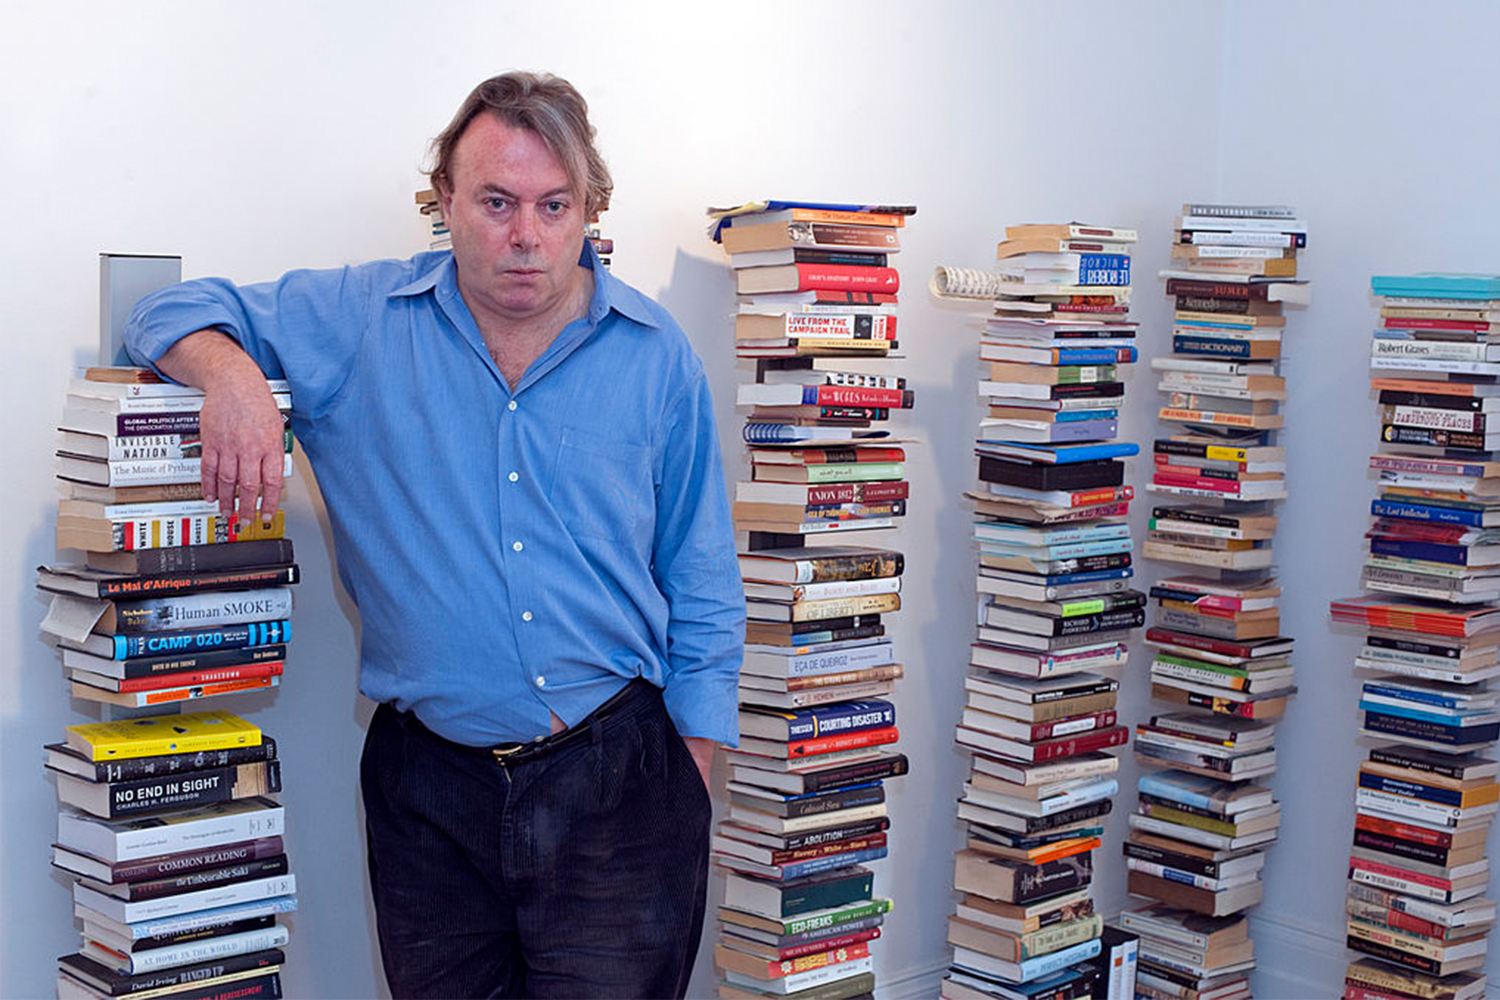 Christopher Hitchens standing next to piles of books